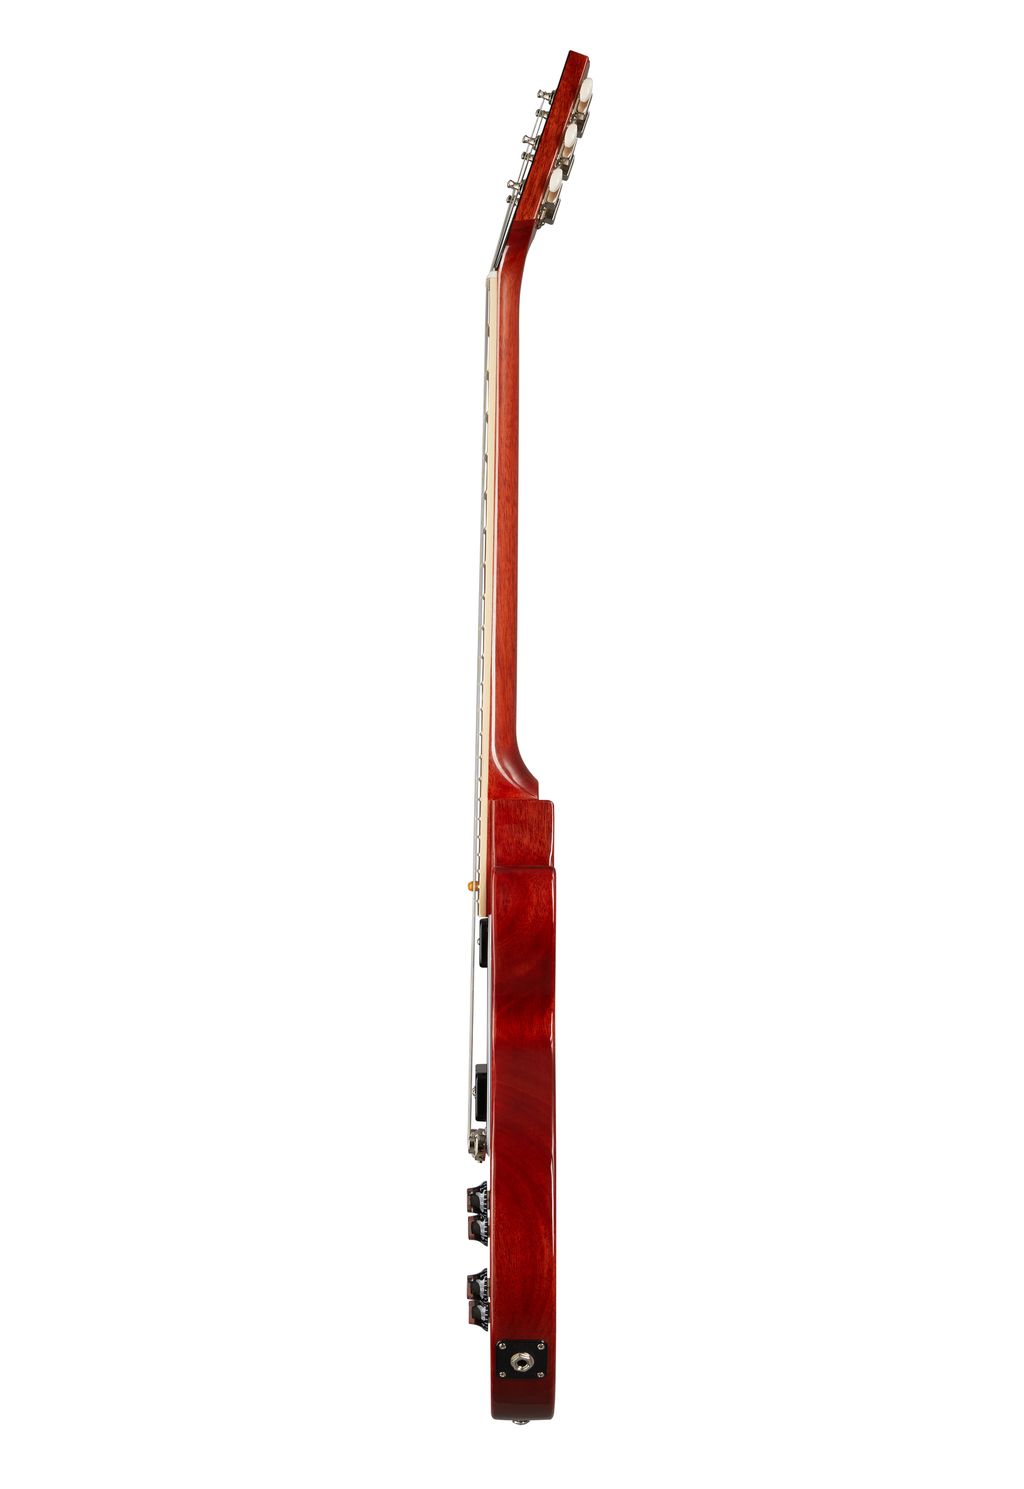 __static.gibson.com_product-images_USA_USAYEG214_Vintage_Cherry_LPSP00VENH1_side